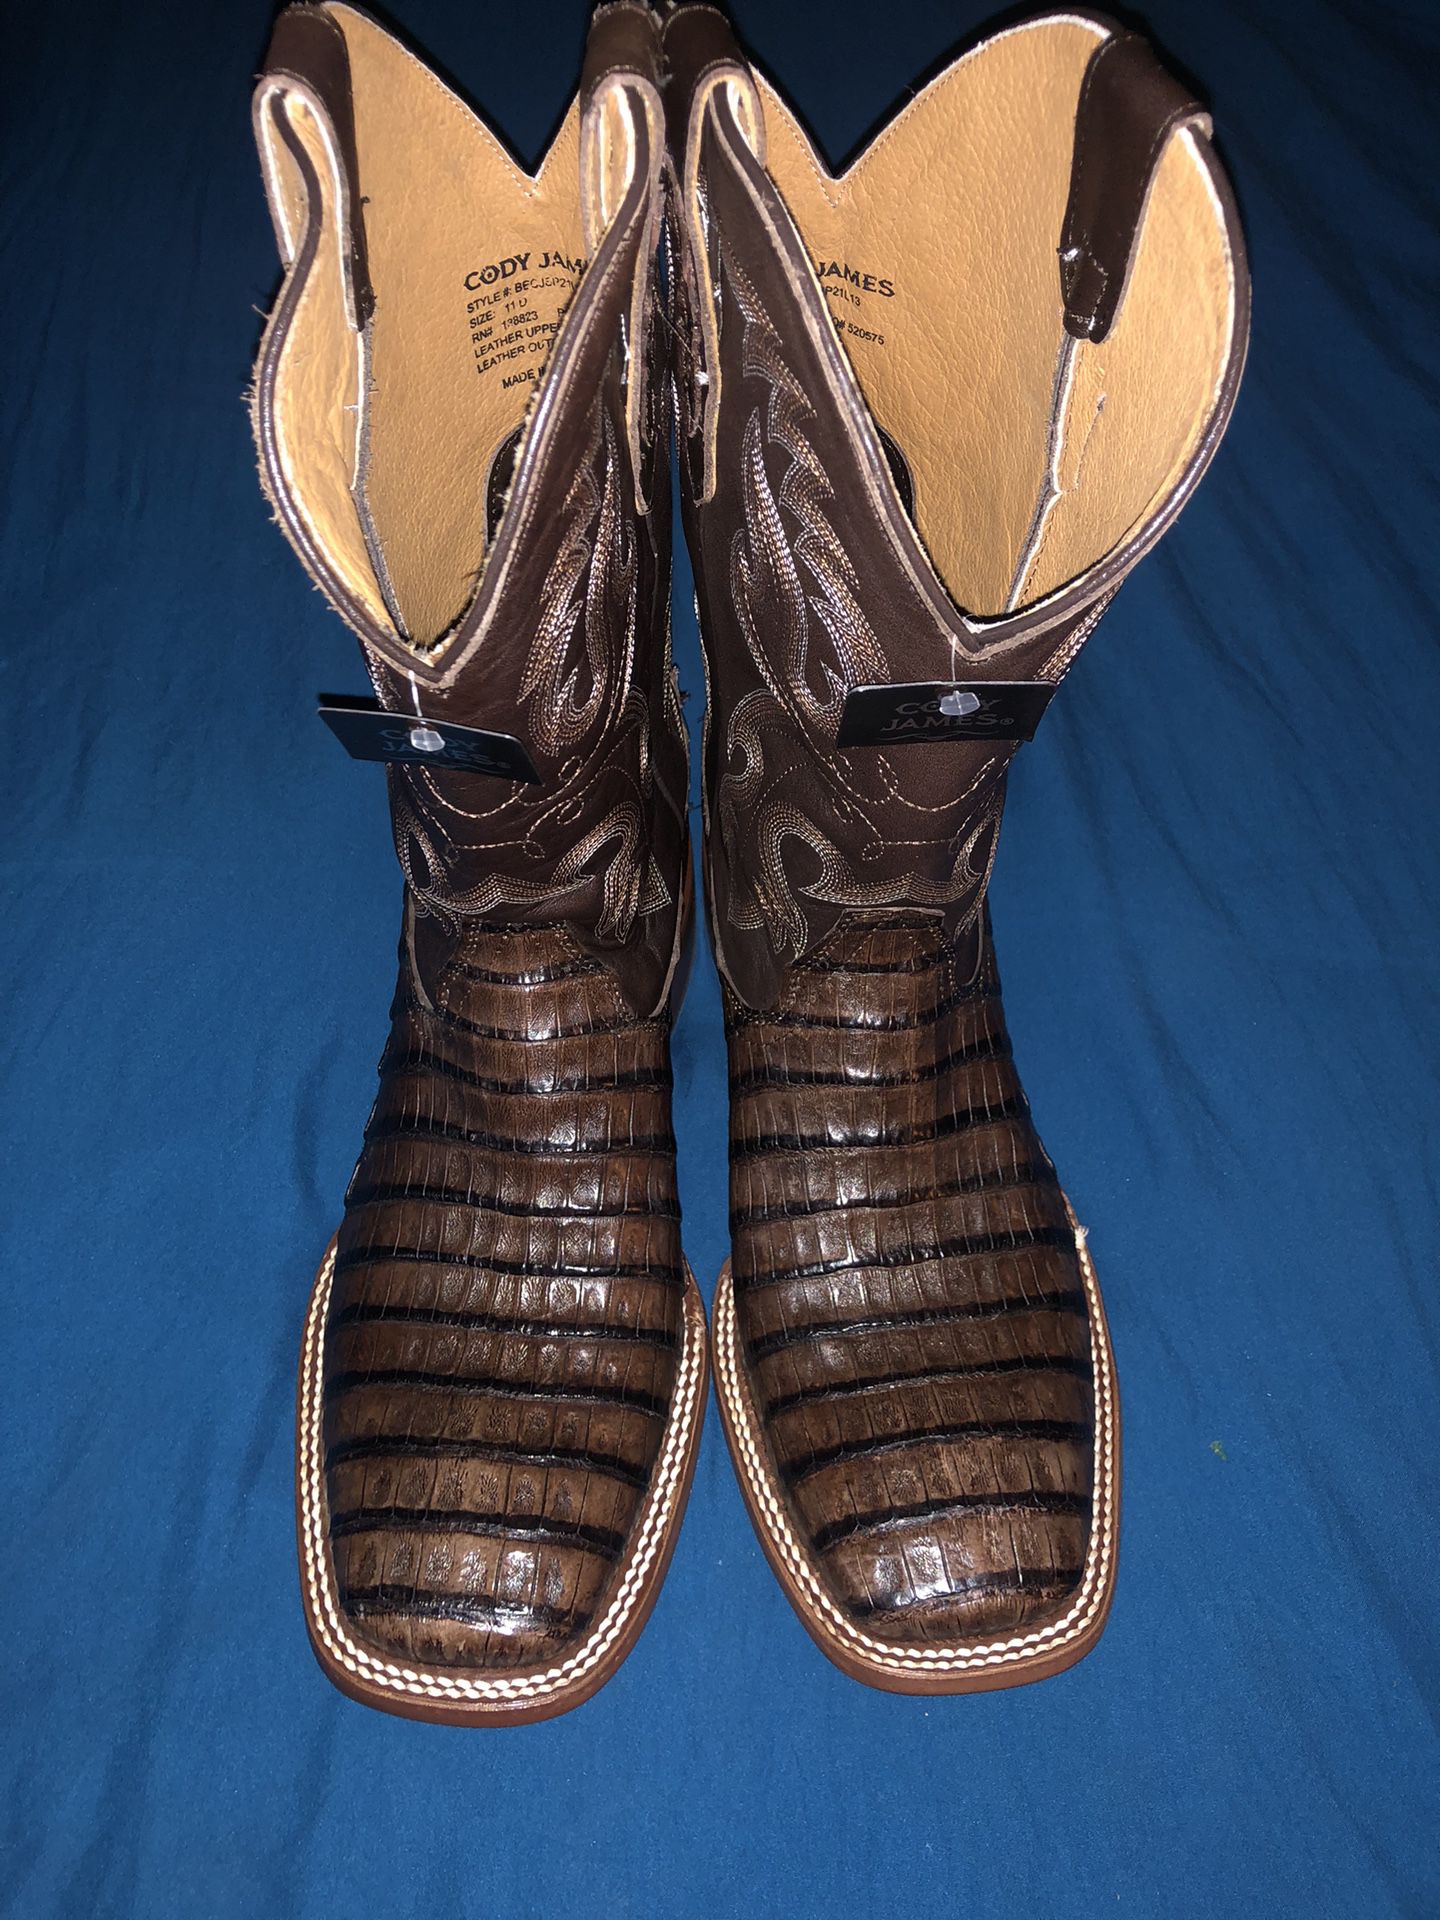 New Cody James Boots 11D.   $235.  